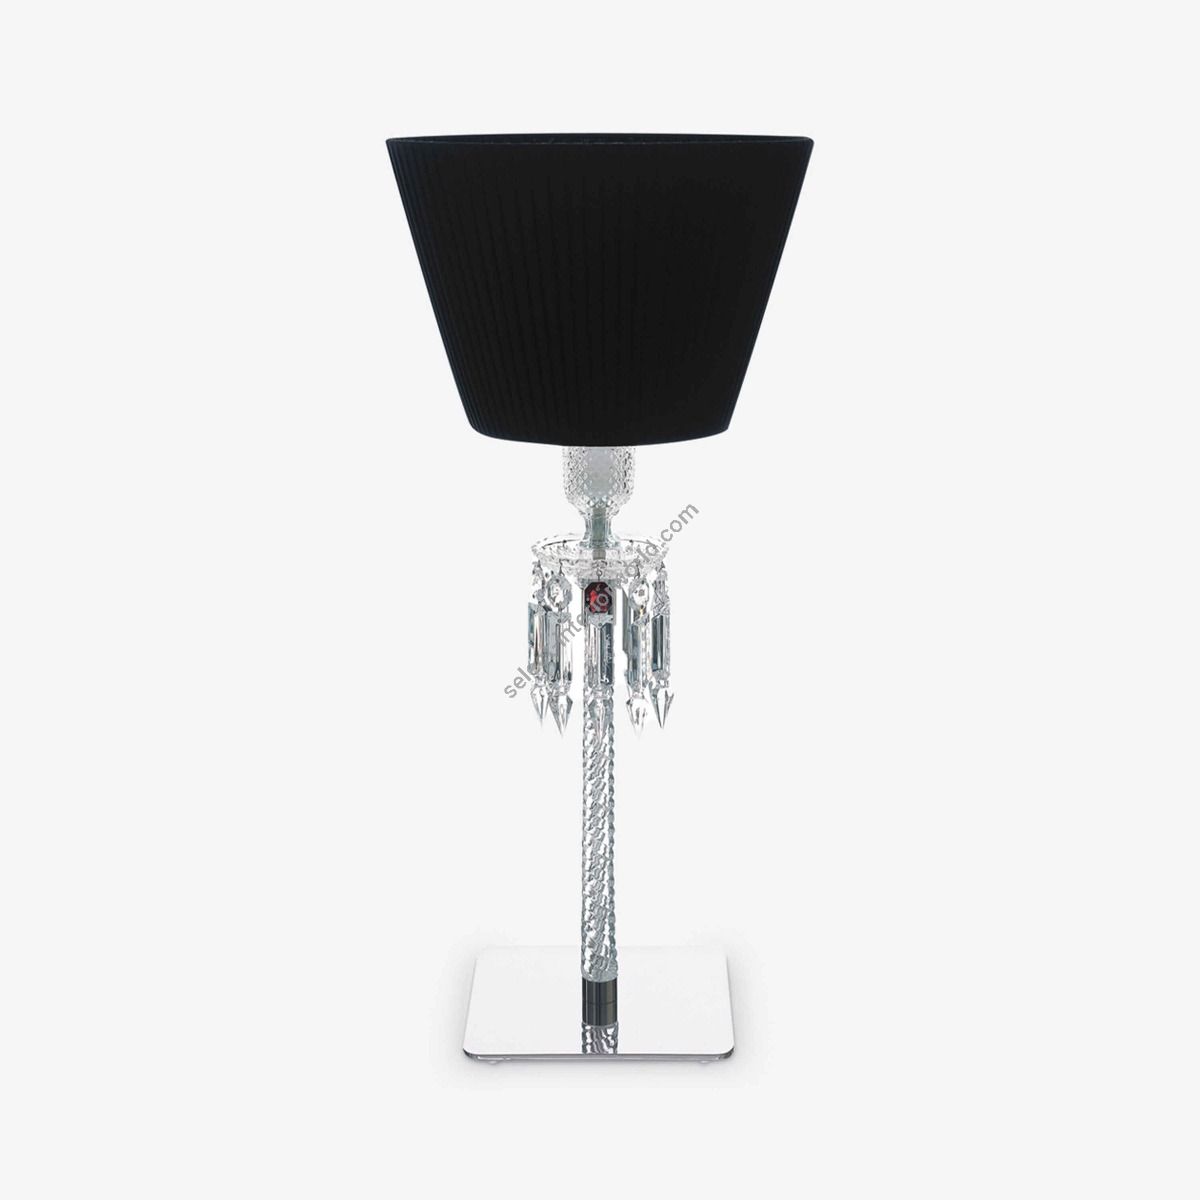 Baccarat / Torch Table Lamp - Black Lampshade